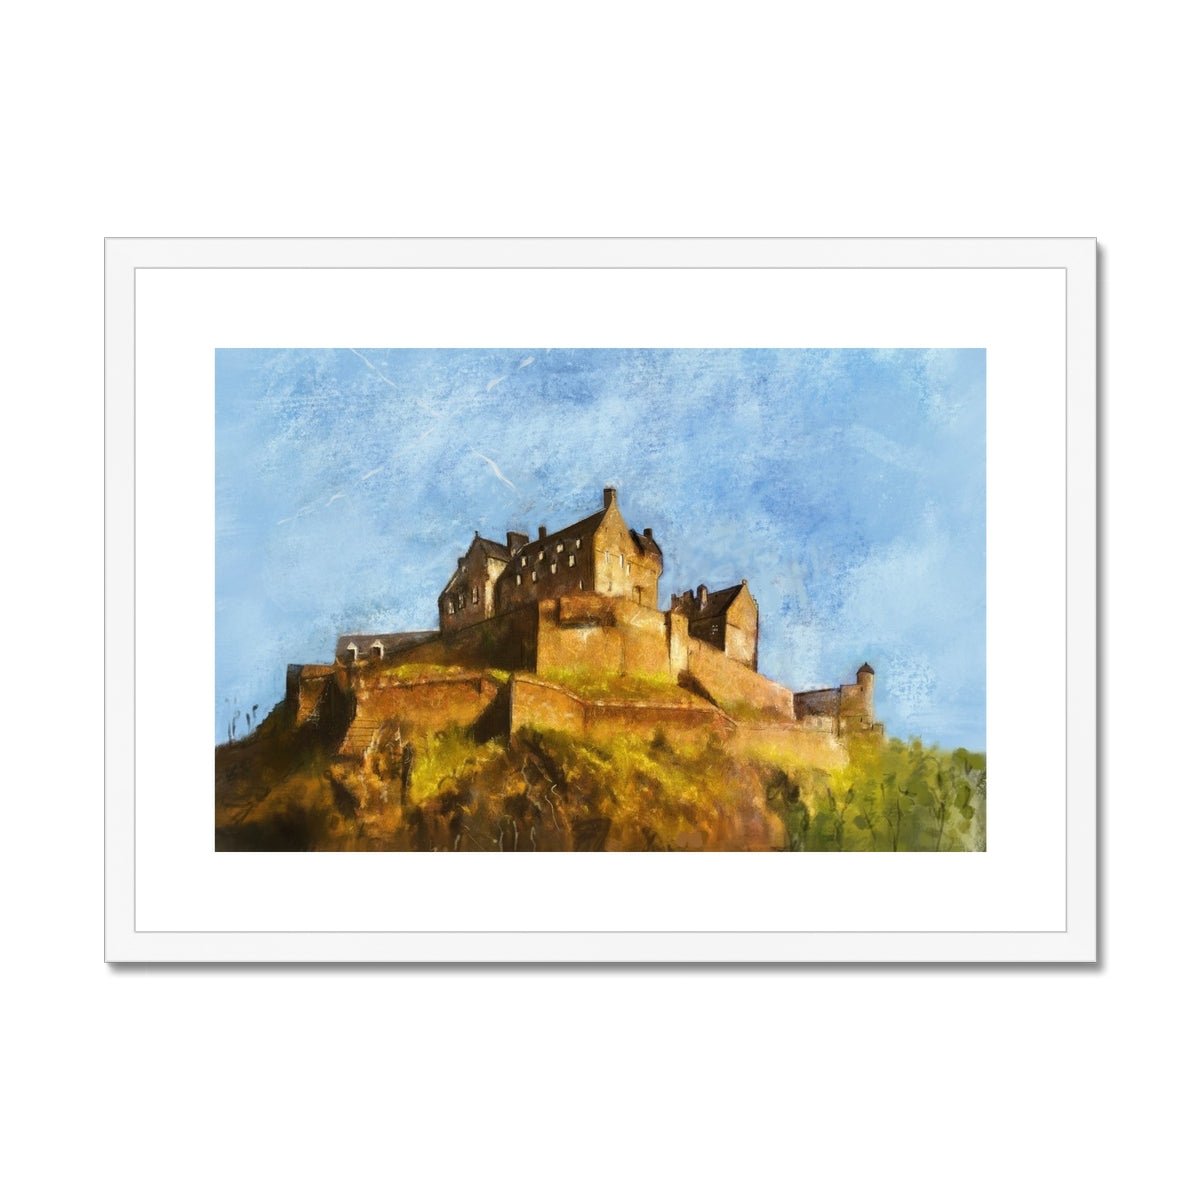 Edinburgh Castle Painting | Framed & Mounted Prints From Scotland-Framed & Mounted Prints-Edinburgh & Glasgow Art Gallery-A2 Landscape-White Frame-Paintings, Prints, Homeware, Art Gifts From Scotland By Scottish Artist Kevin Hunter